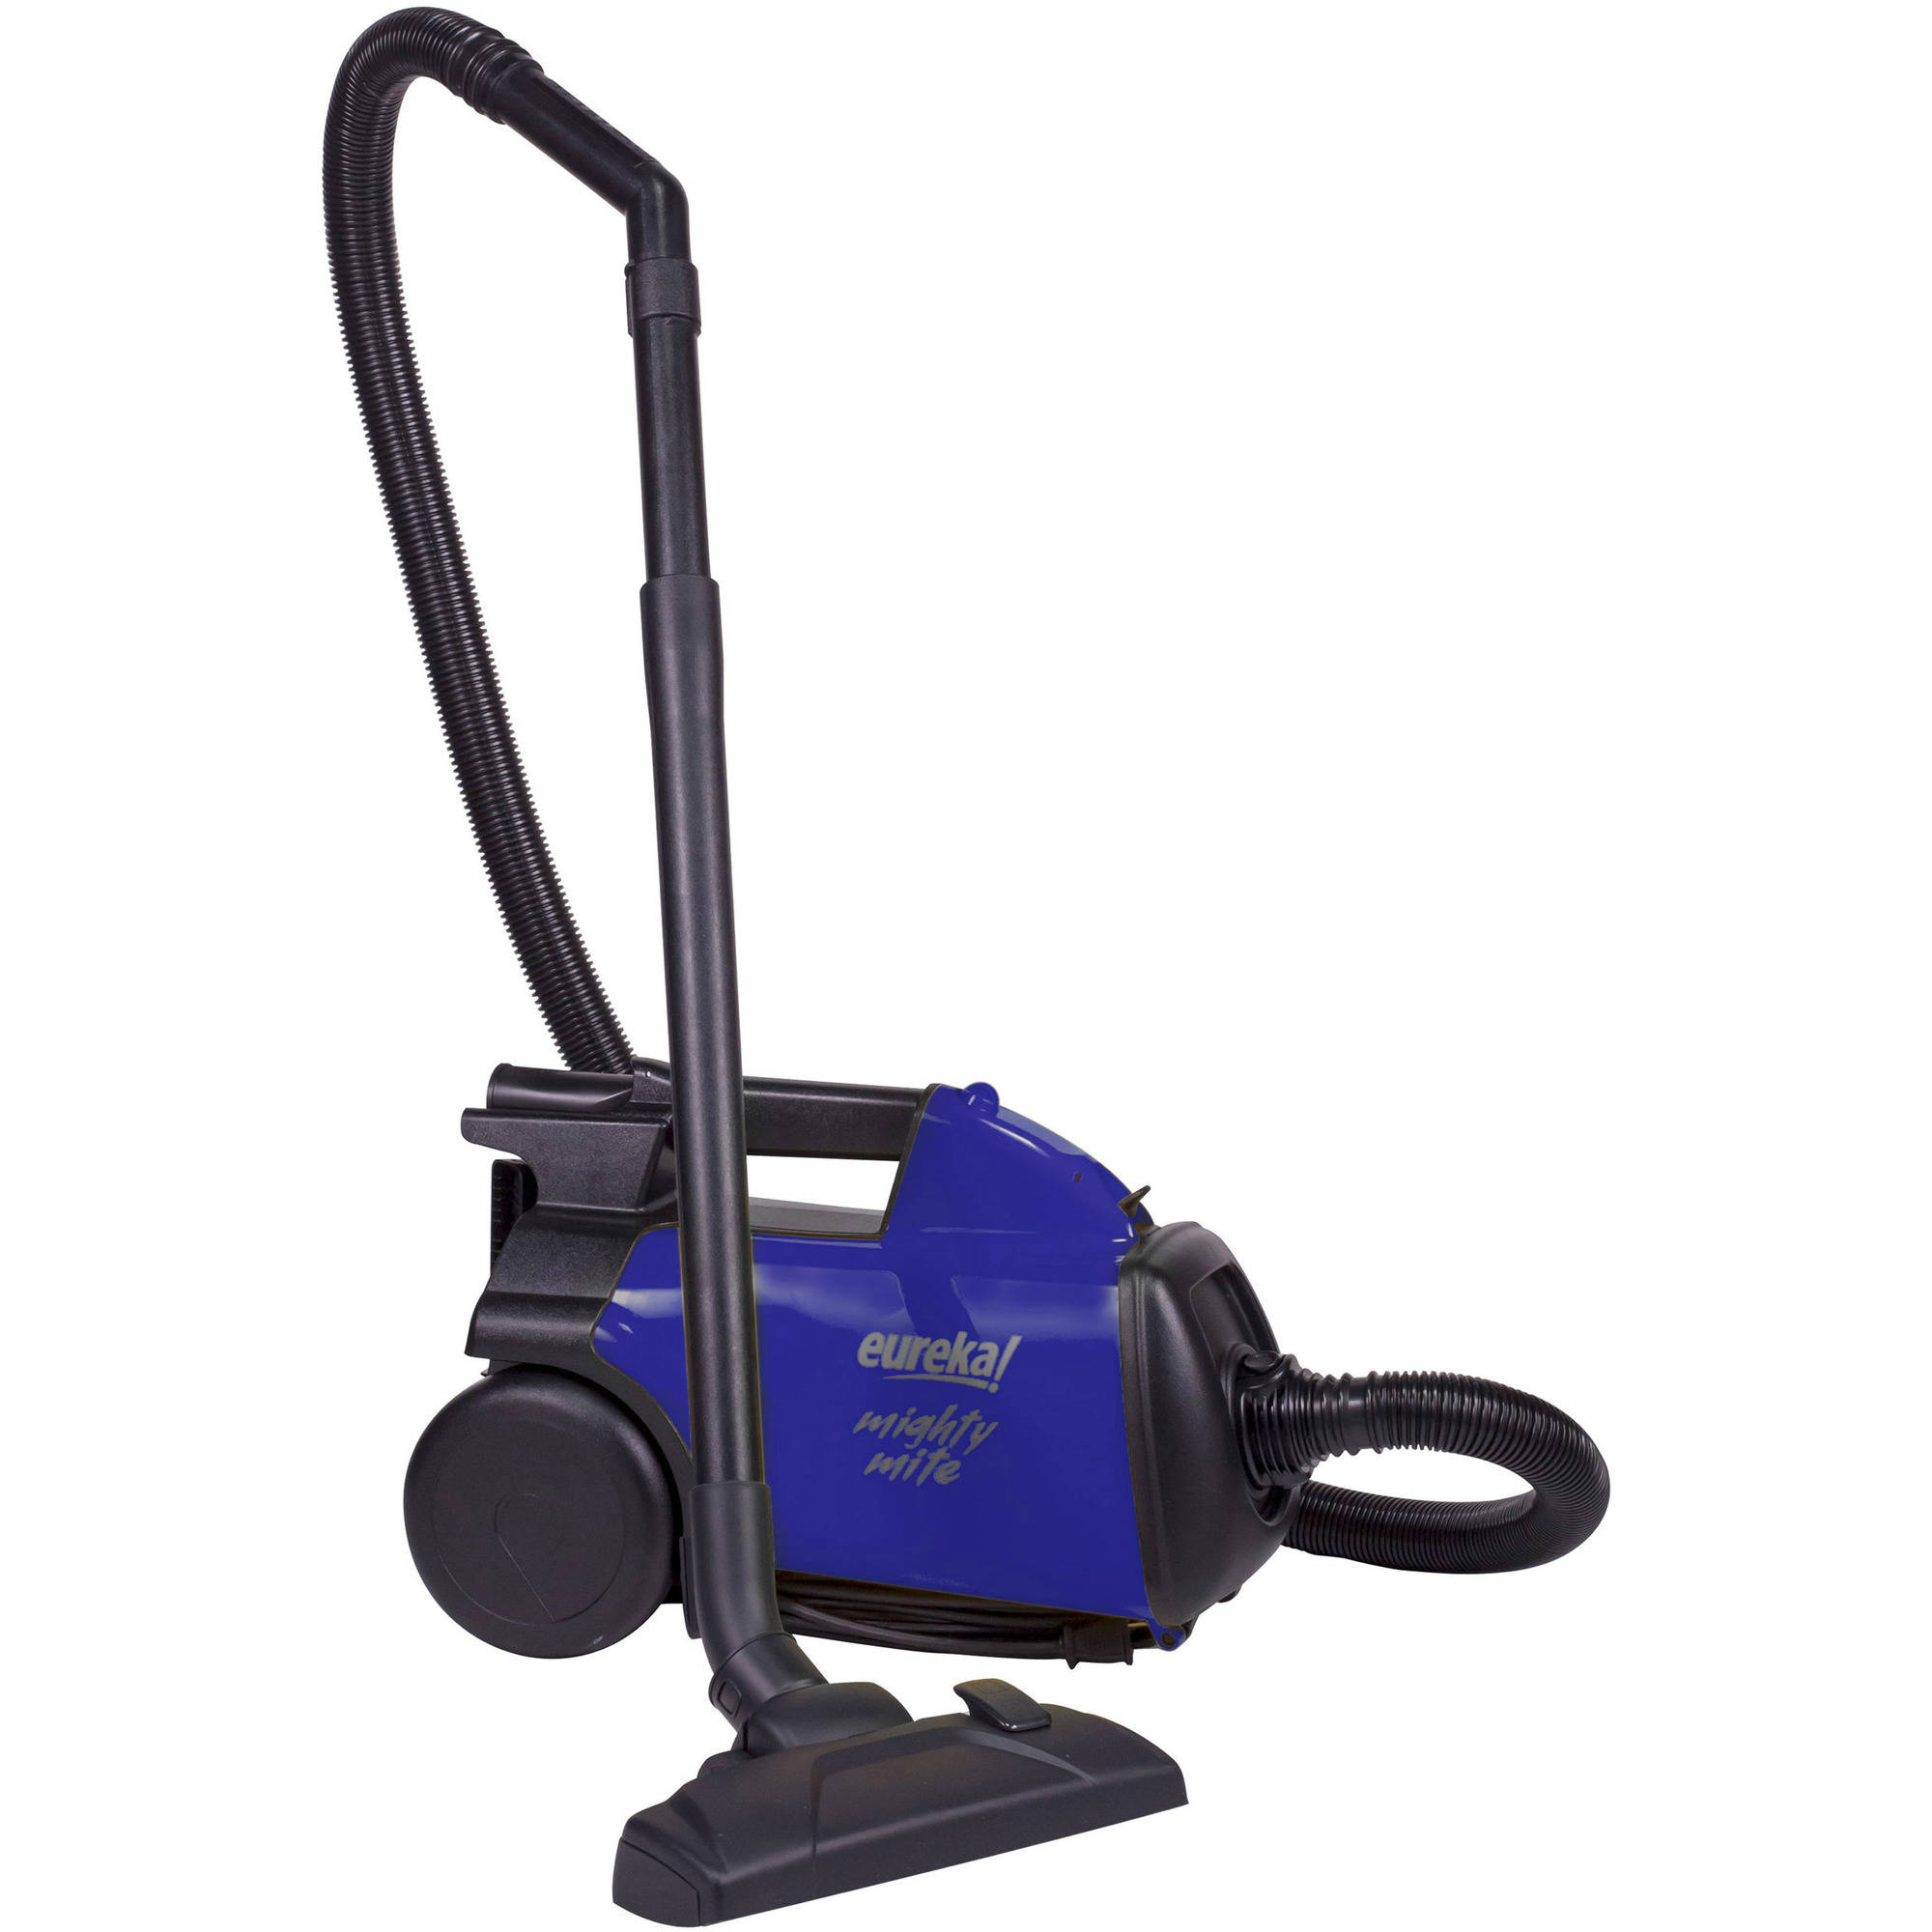 EUREKA 3670H Canister Vacuum Cleaner, w/ 2 bags, Blue - image 1 of 7